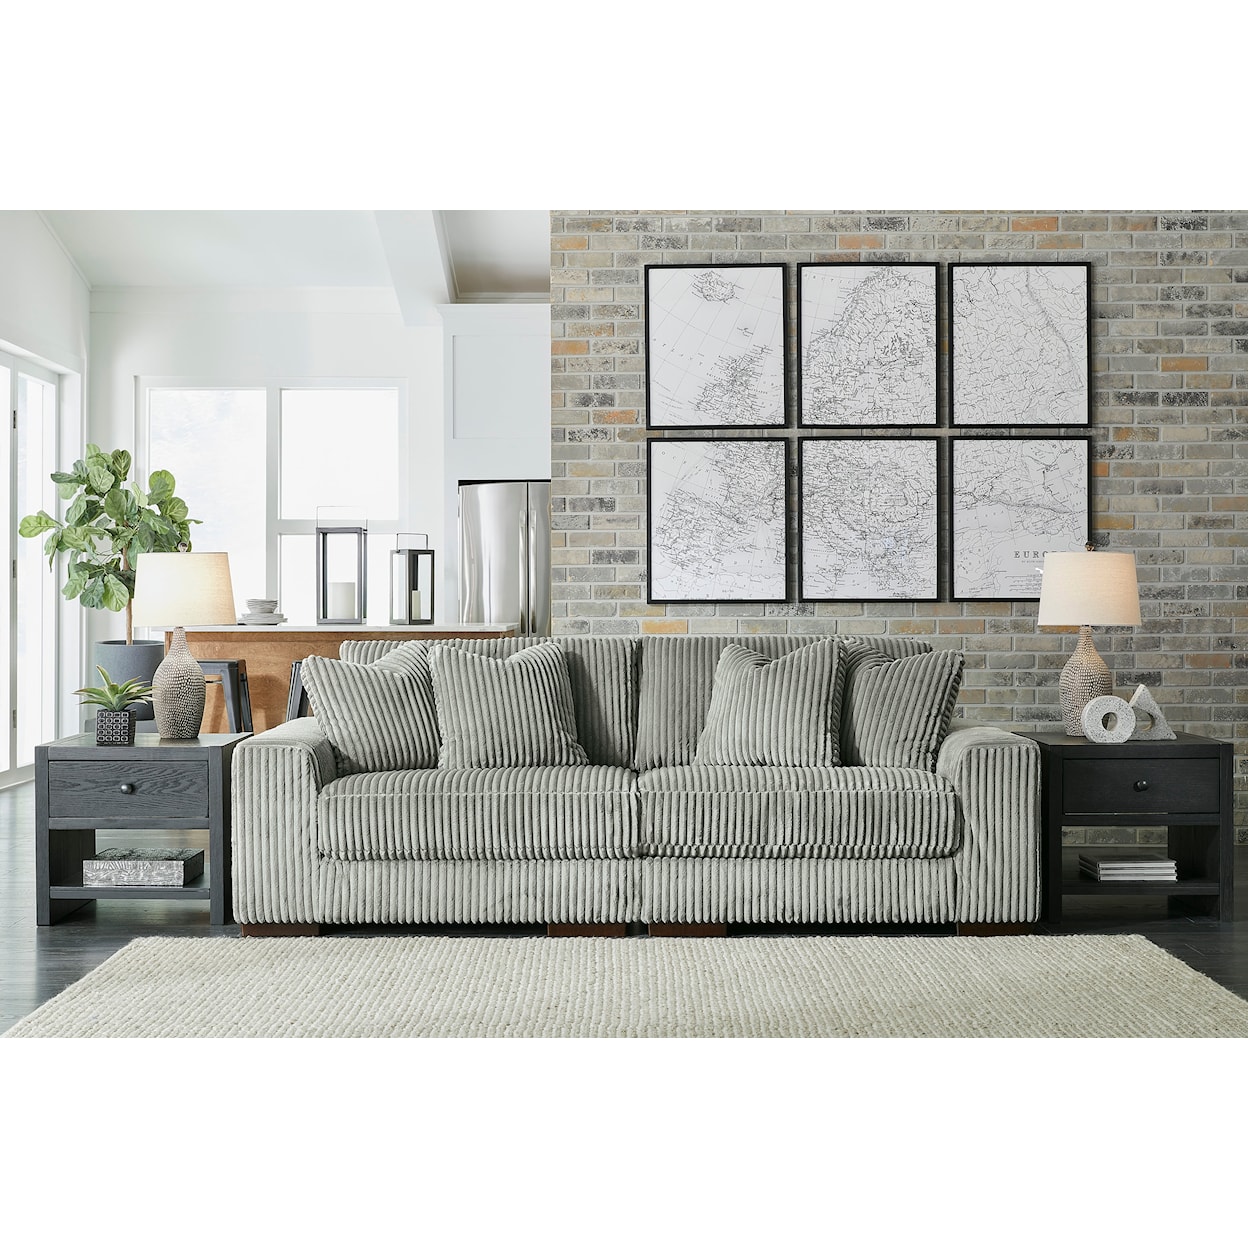 Signature Design by Ashley Furniture Lindyn Sectional Sofa